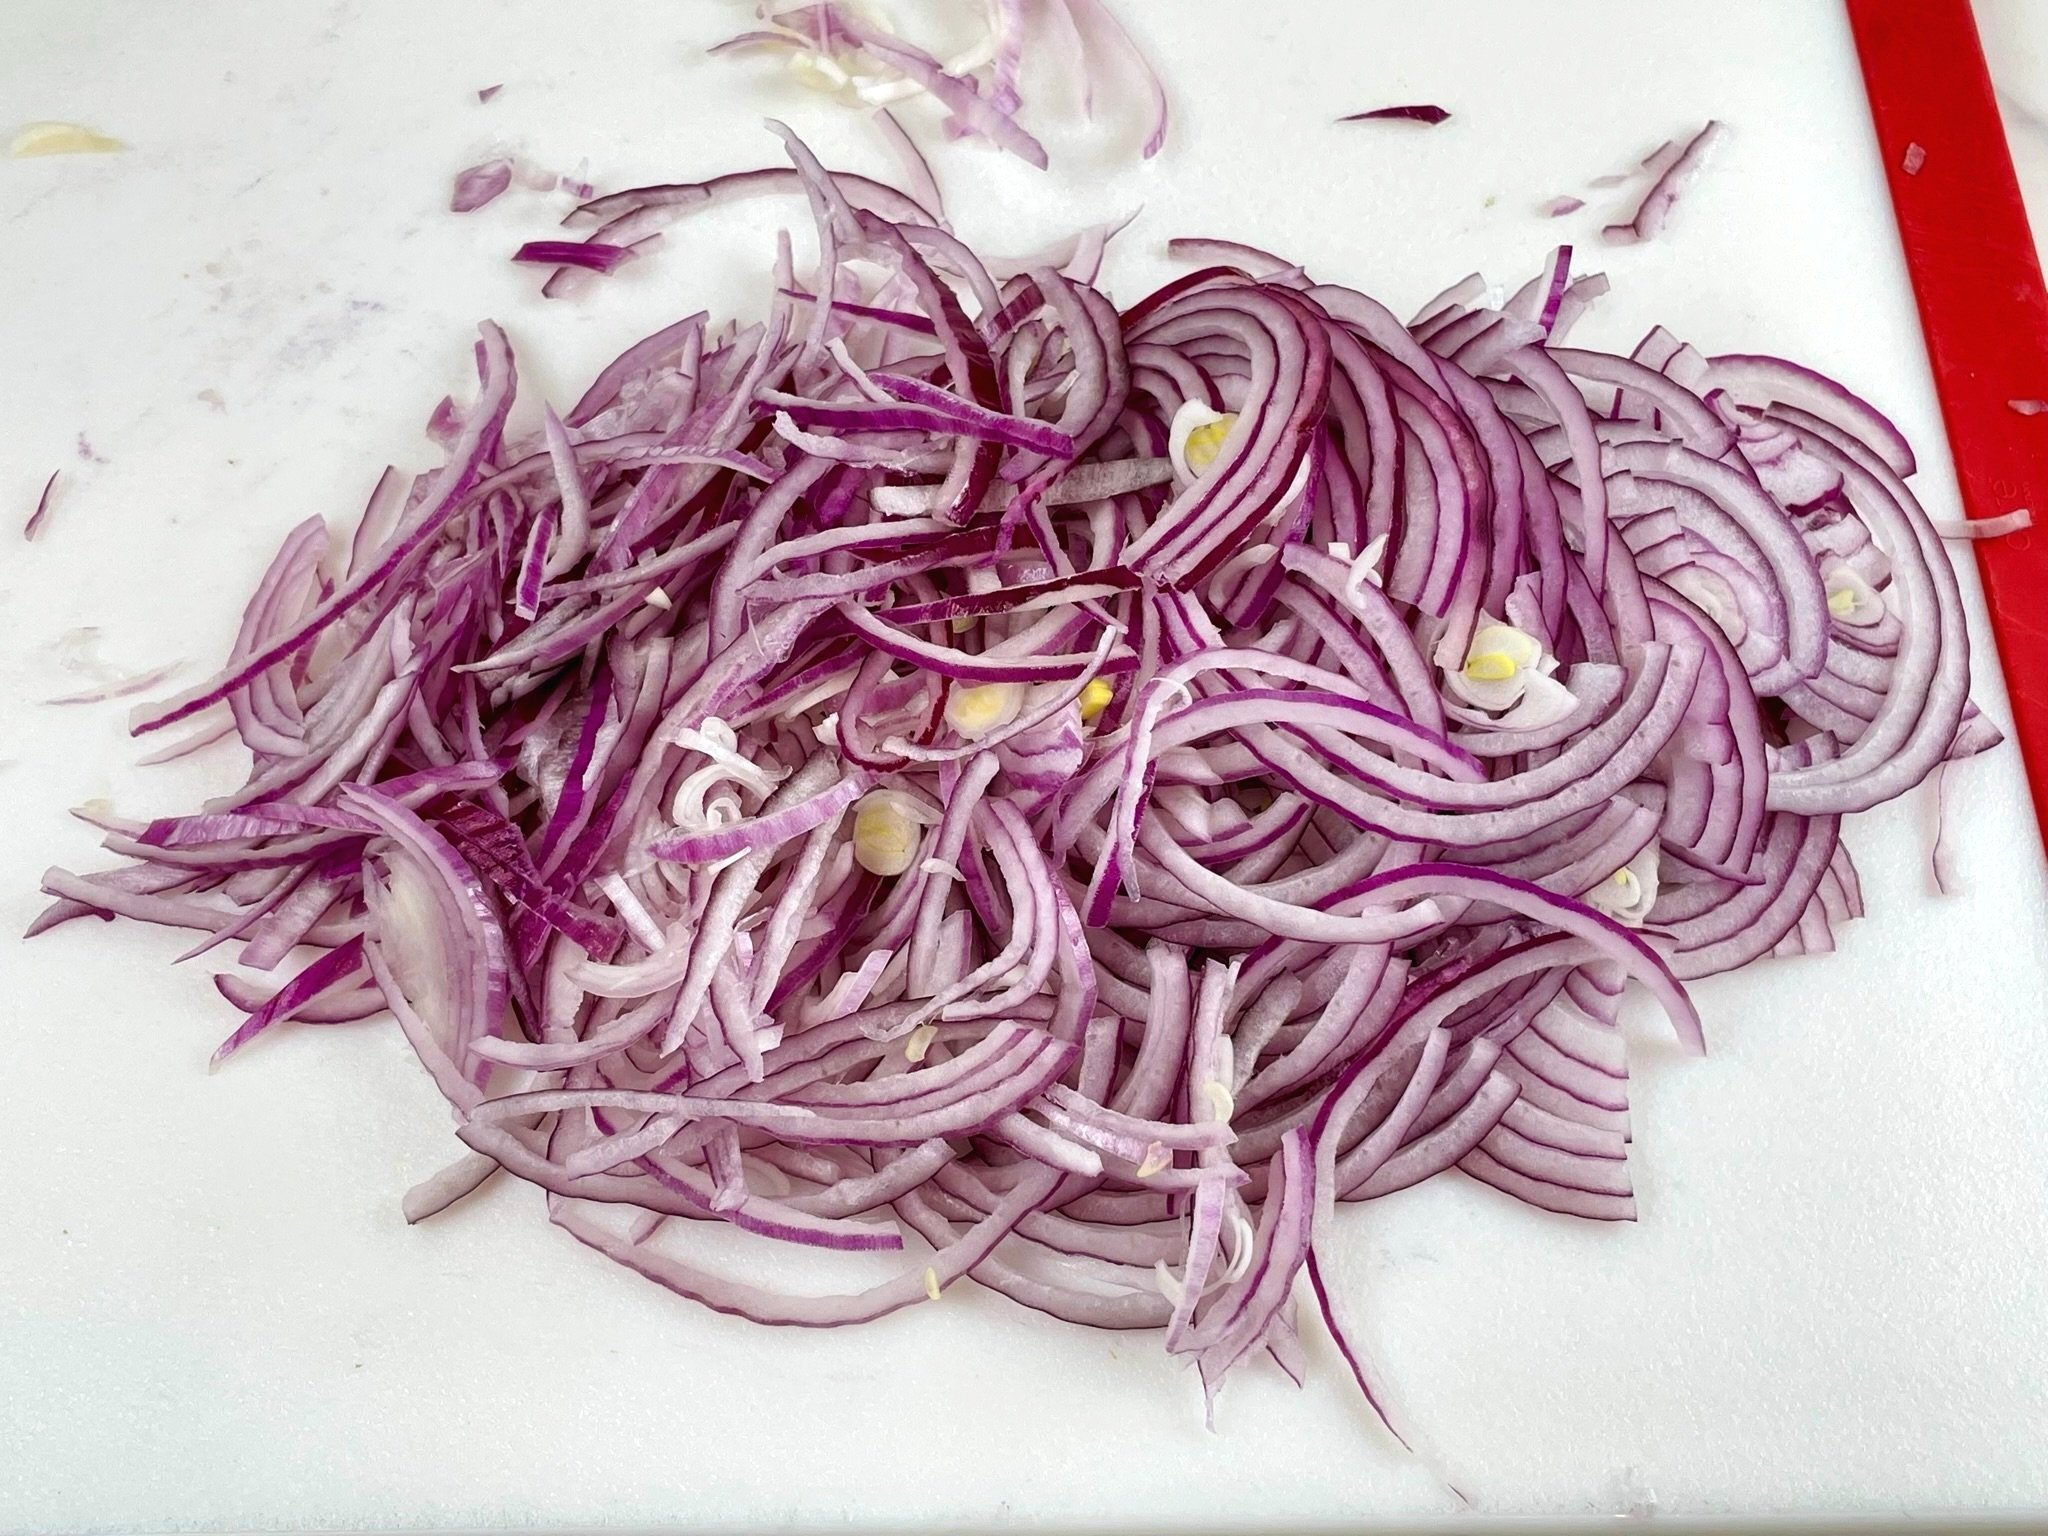 Thinly sliced onion.